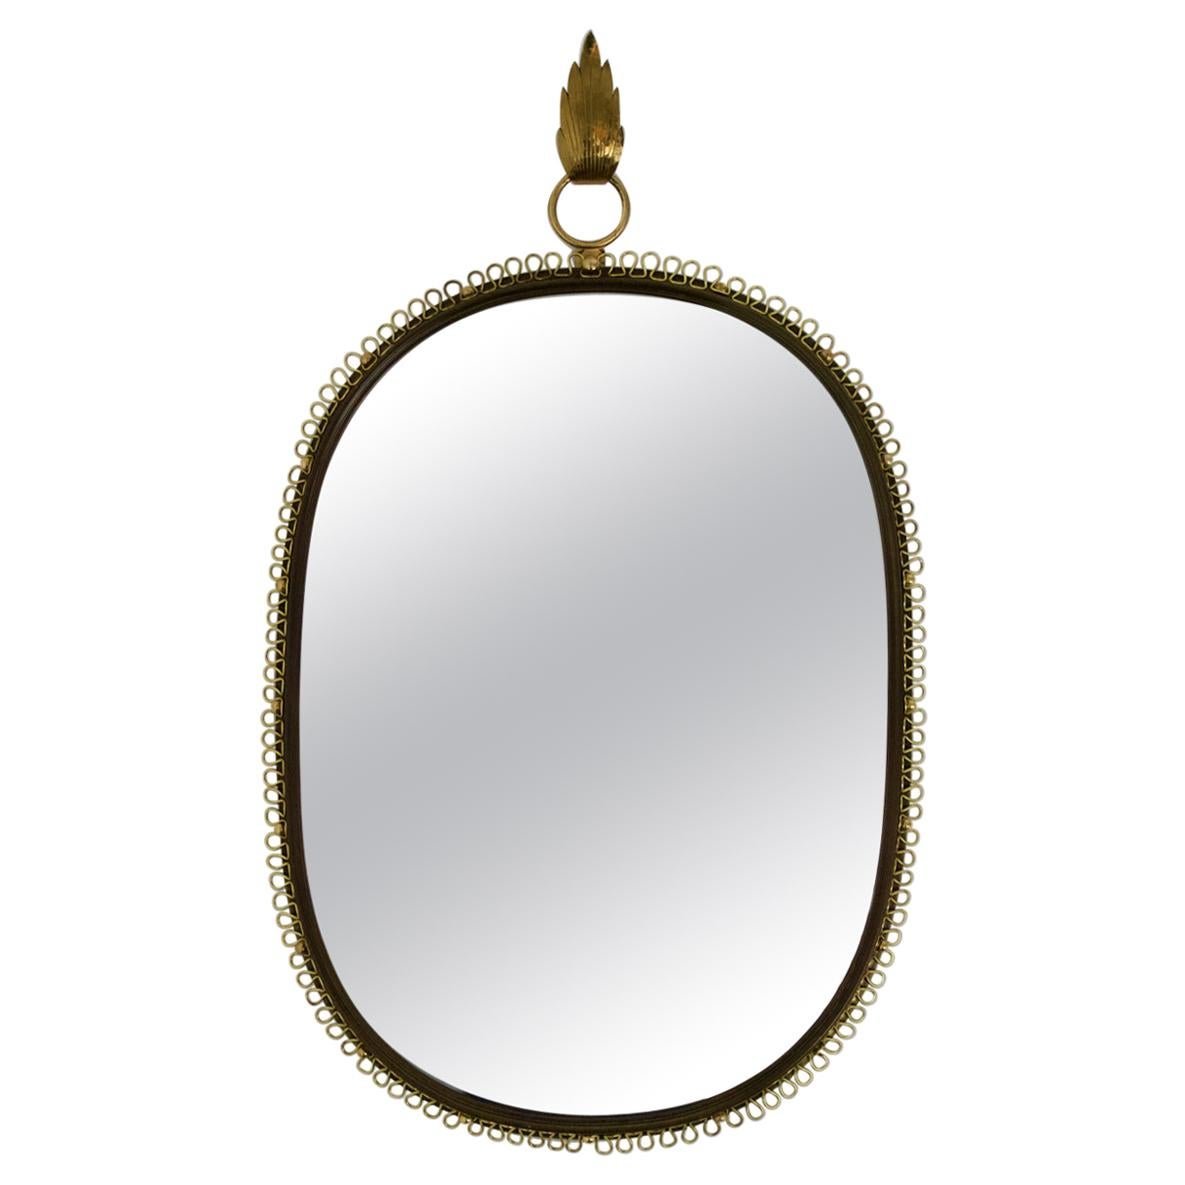 Midcentury Wall-Mounted Mirror with Brass Loop Frame by Josef Frank, Sweden